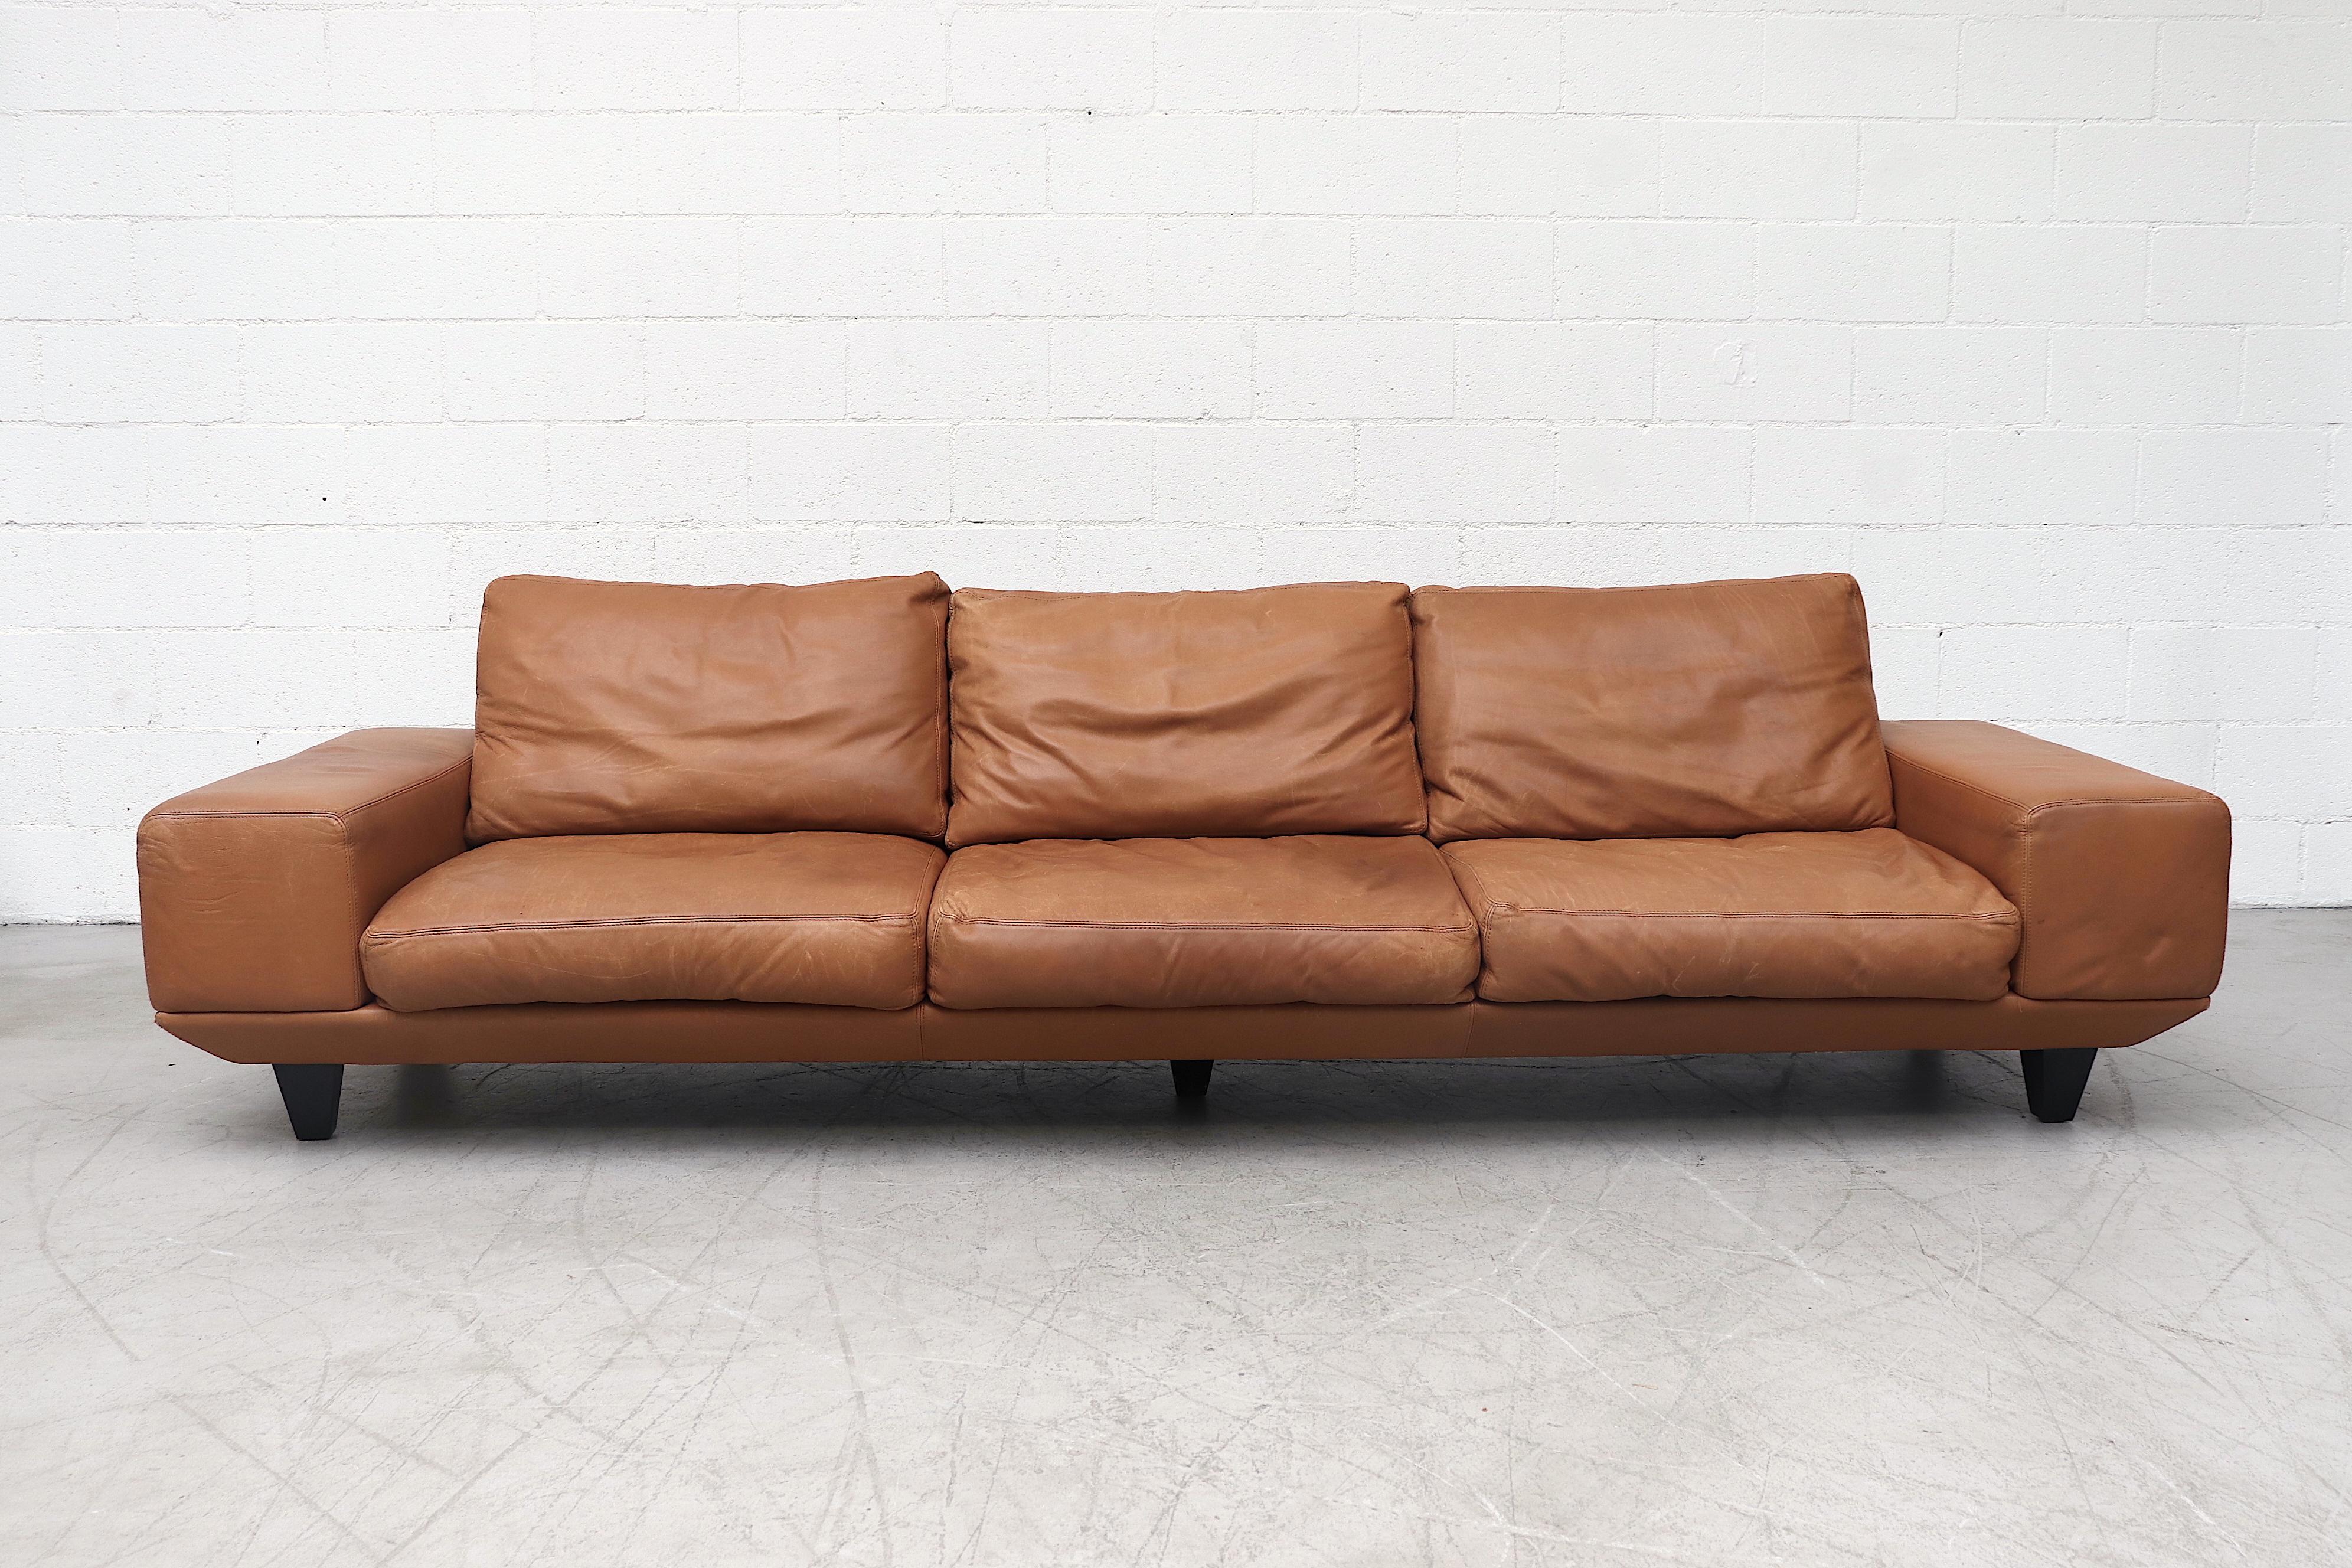 Extra large Molinari cognac leather sofa with five sturdy wood legs supporting it's sizable frame. Gorgeous style with oversized armrests. Removable seat and back cushions connected by Velcro. In original condition with wear consistent with age and